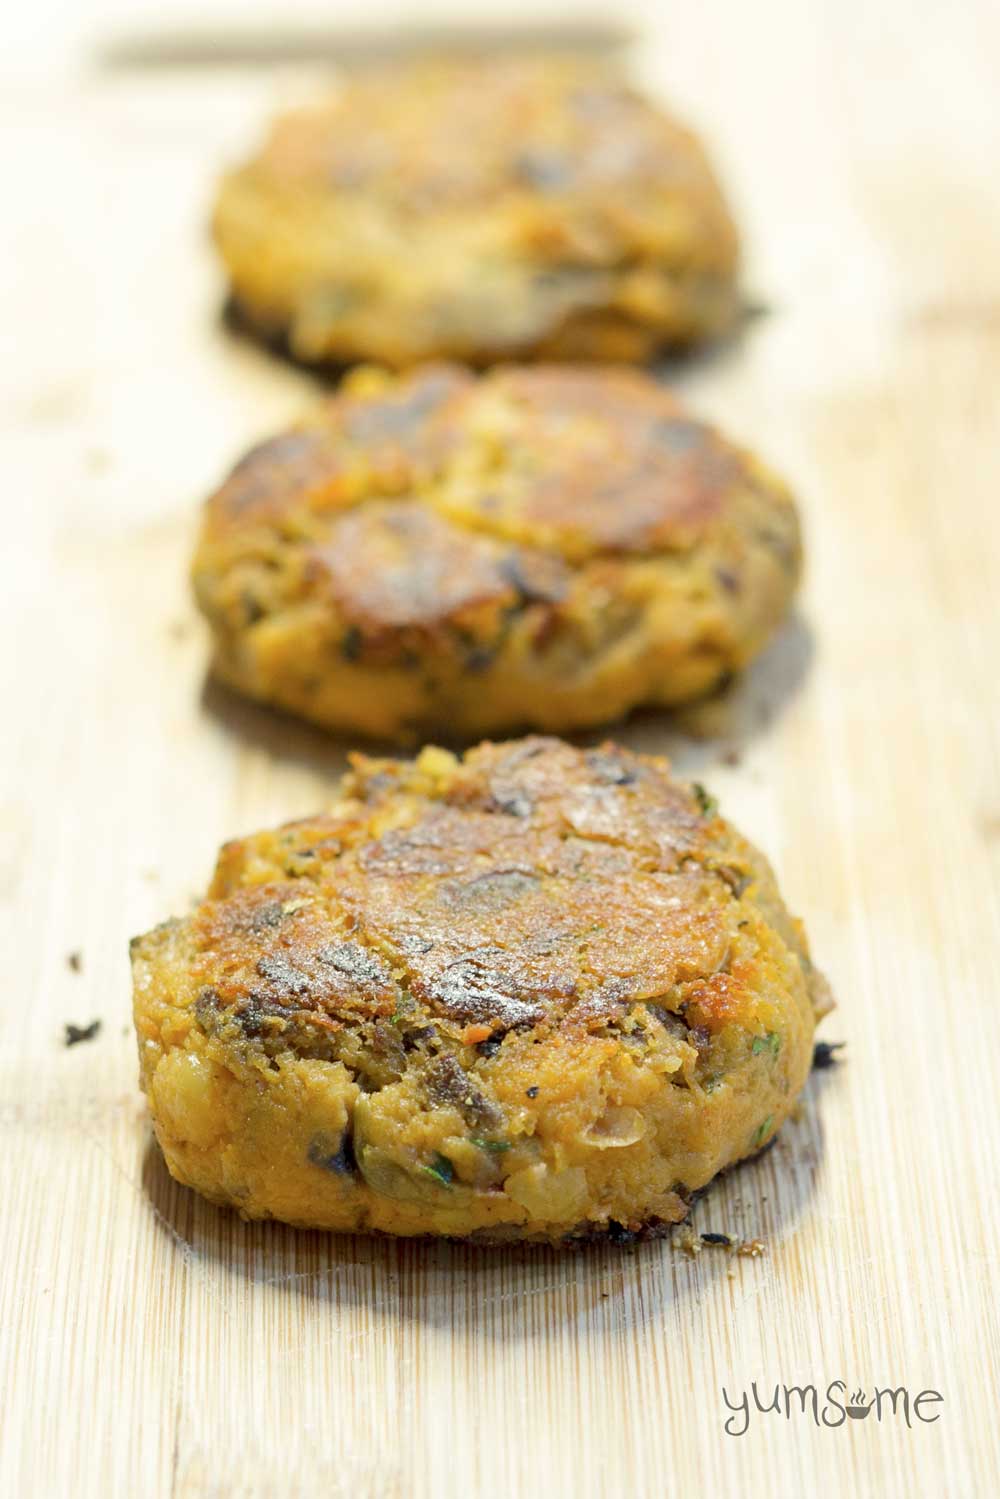 Tahini and squash add moistness and flavour to these chickpea burgers, while the polenta gives them a lovely, crispy coating. | yumsome.com